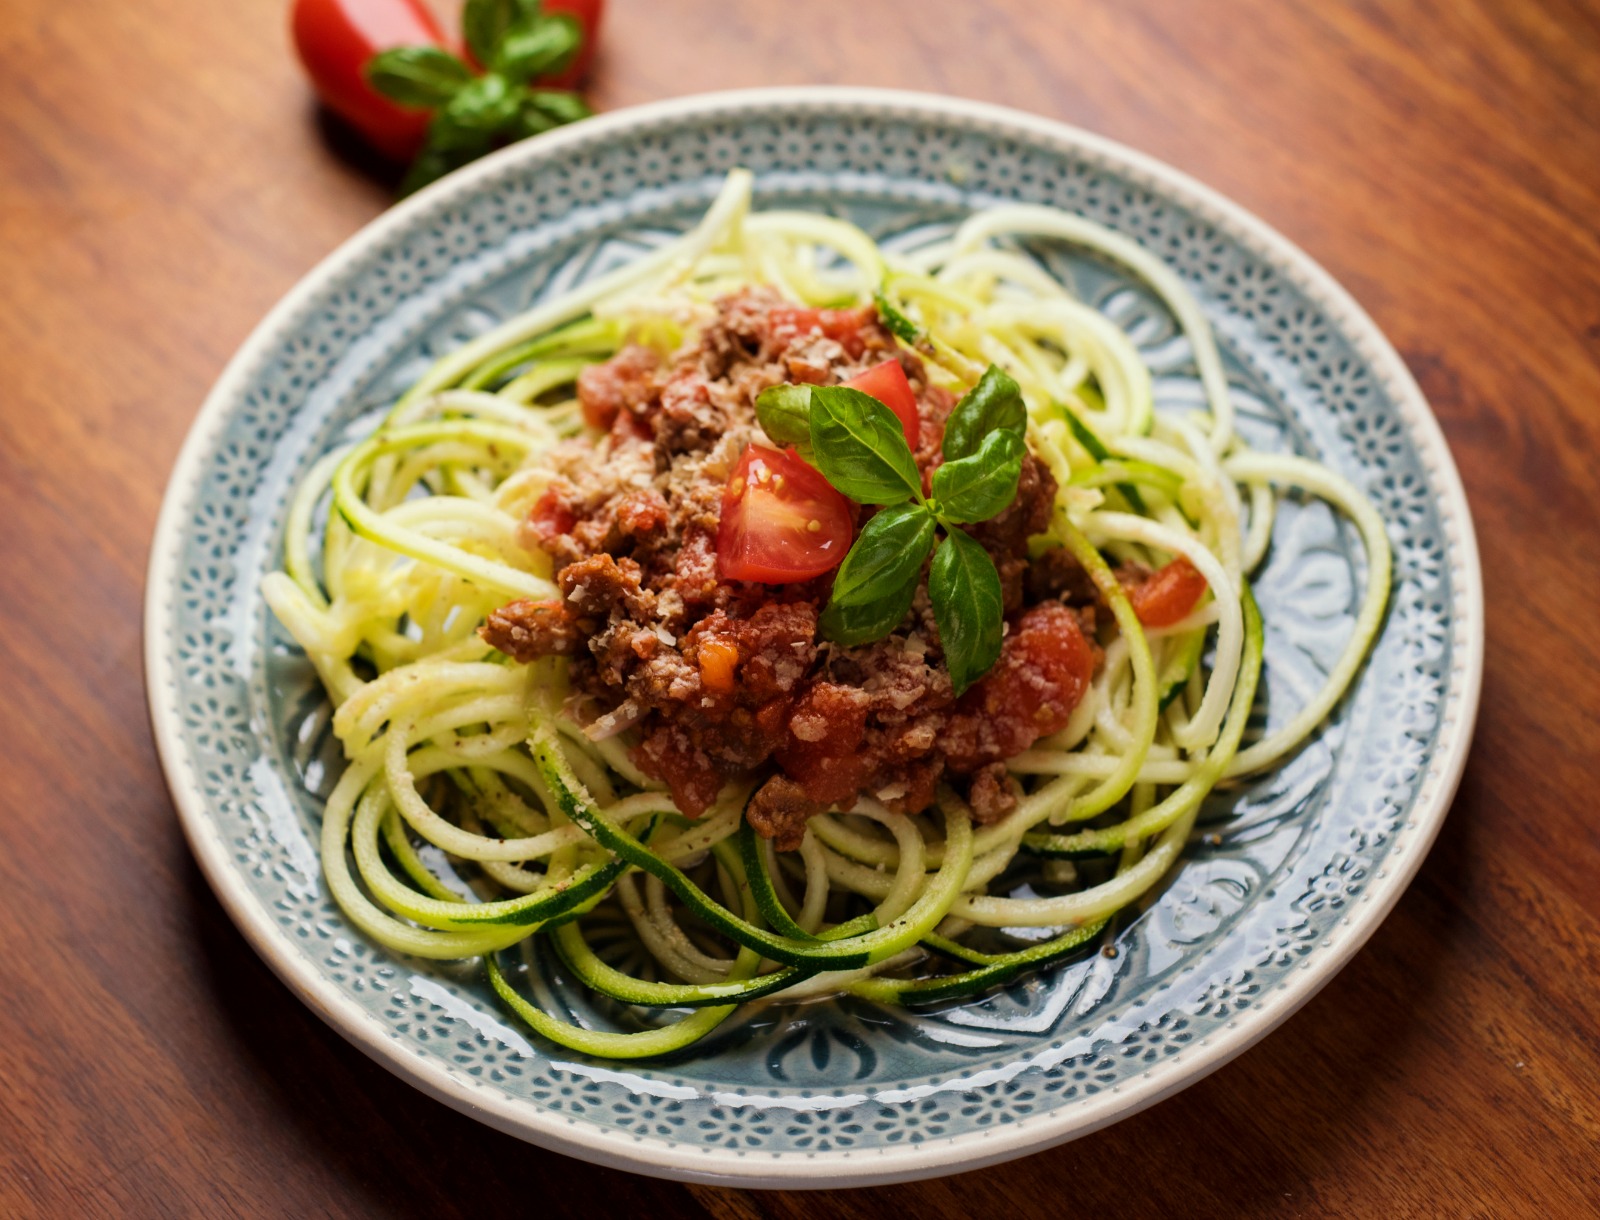 This vegan bolognese sauce captures the robust meaty flavor of the classic preparation with healthy mushrooms, eggplant and an aromatic sofrito. There is also one secret umami ingredient that adds yet another level of depth and flavor. (#vegan) ordinaryvegan.net